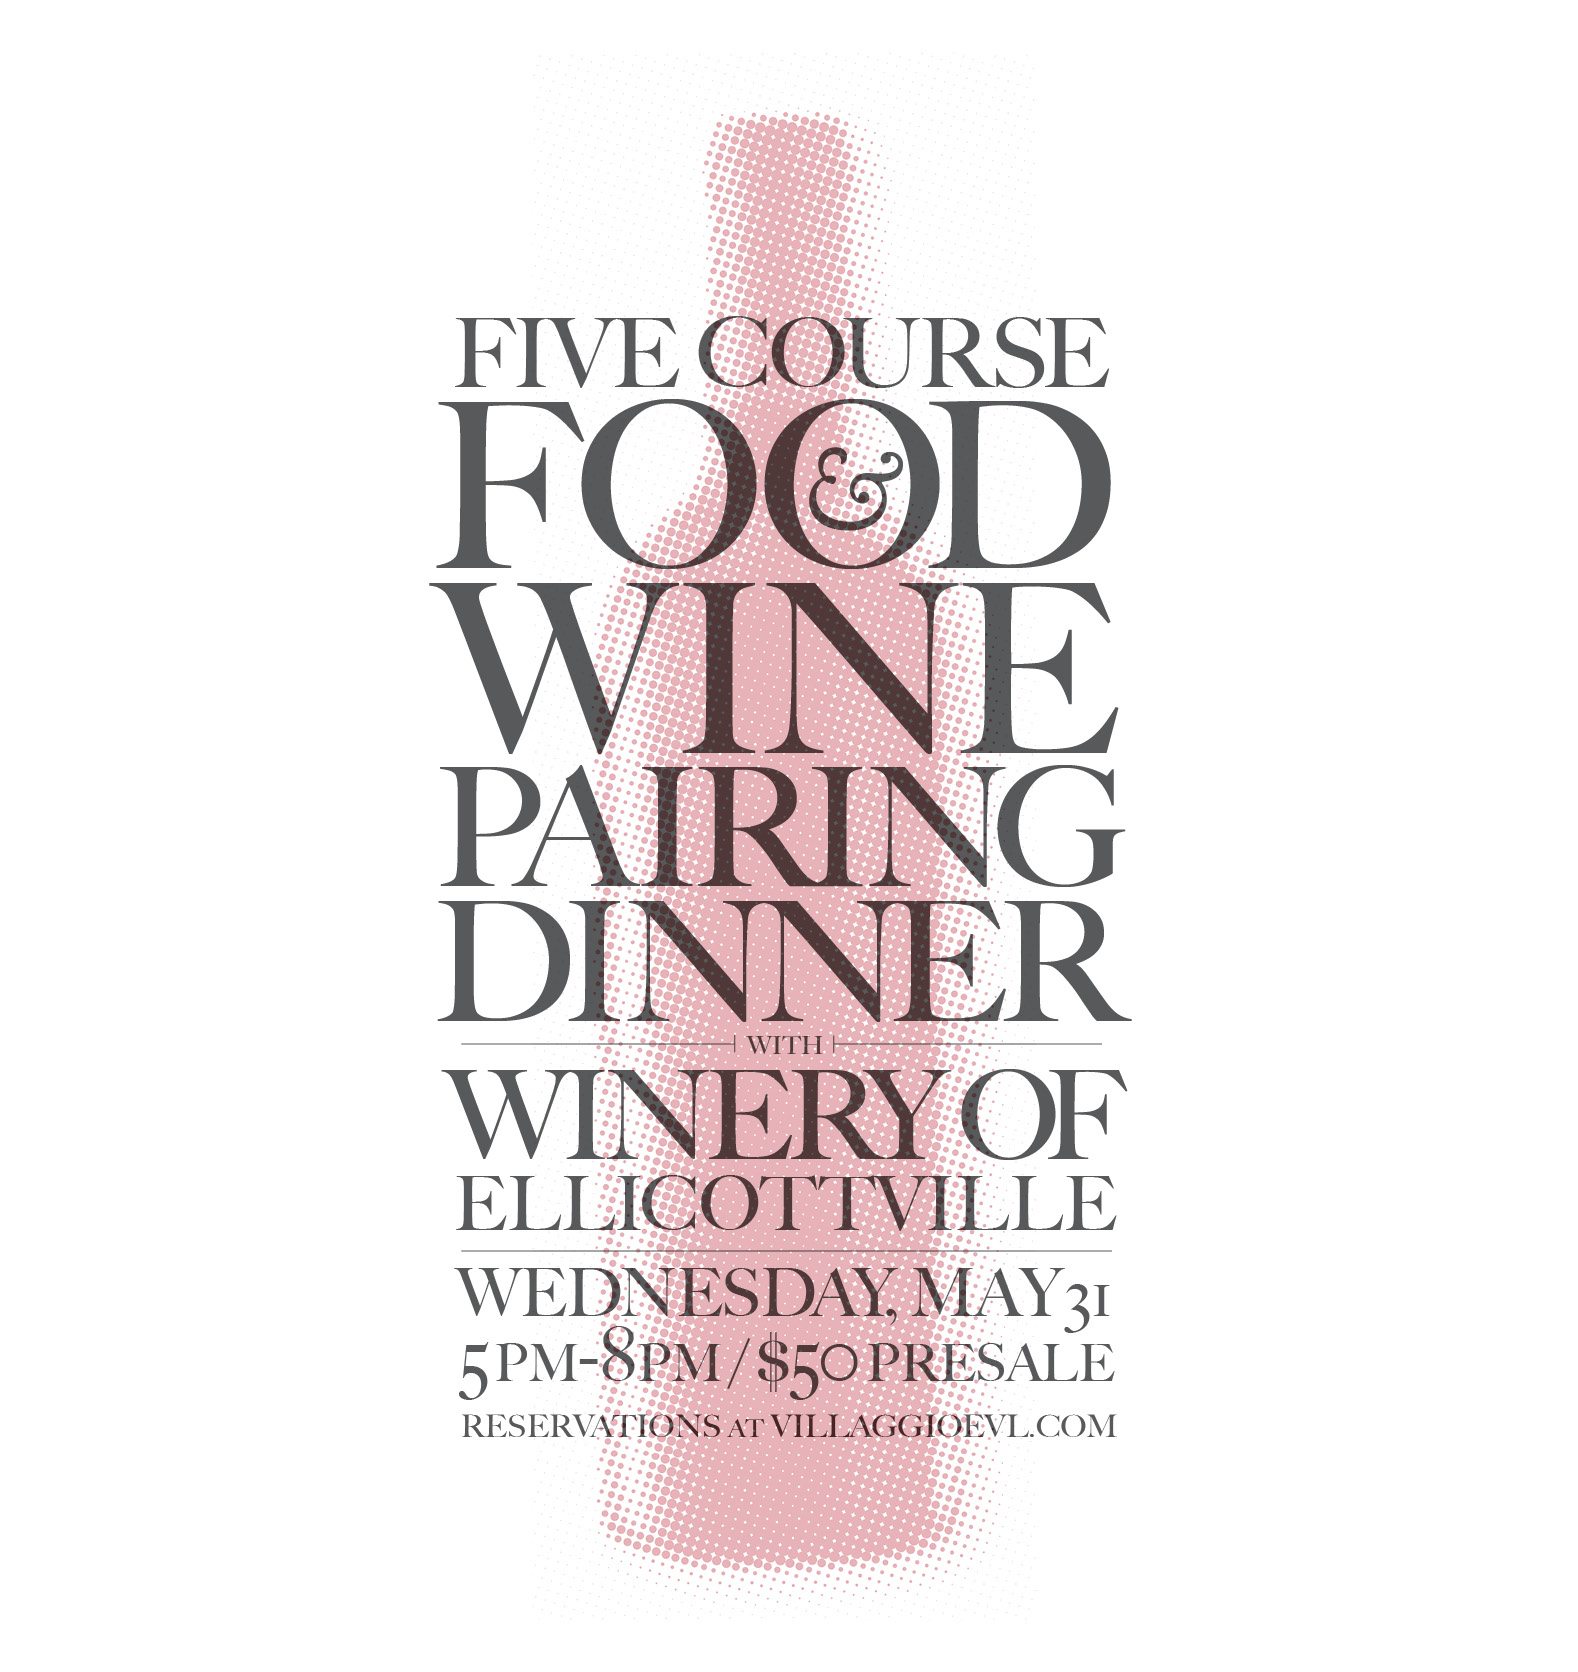 Five Course Wine Pairing Dinner with Winery of Ellicottville